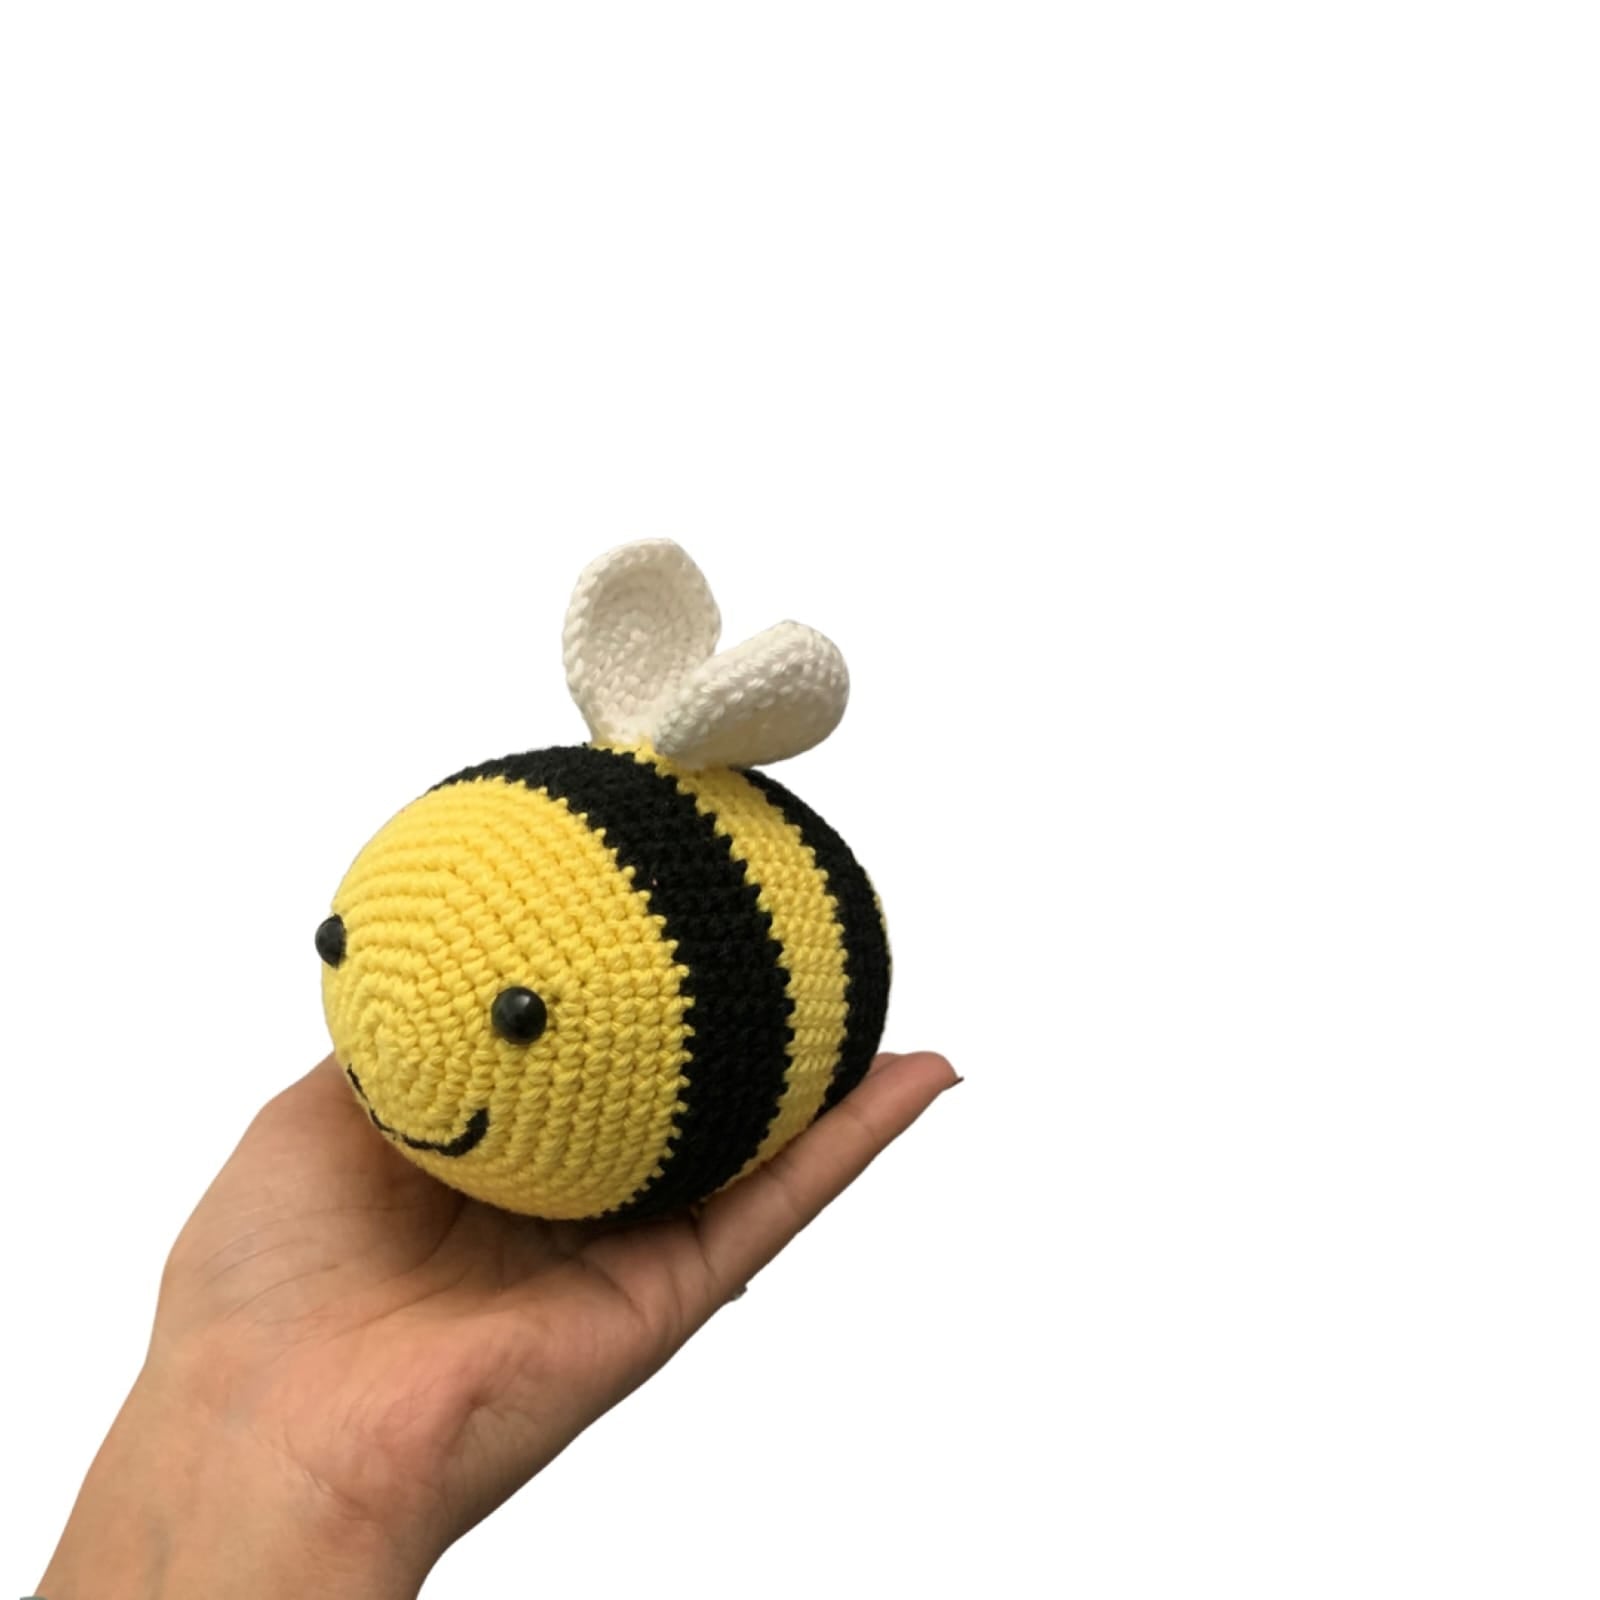 Customized Small Cute Promotional Bee Toys Stuffed Honeybee Toy